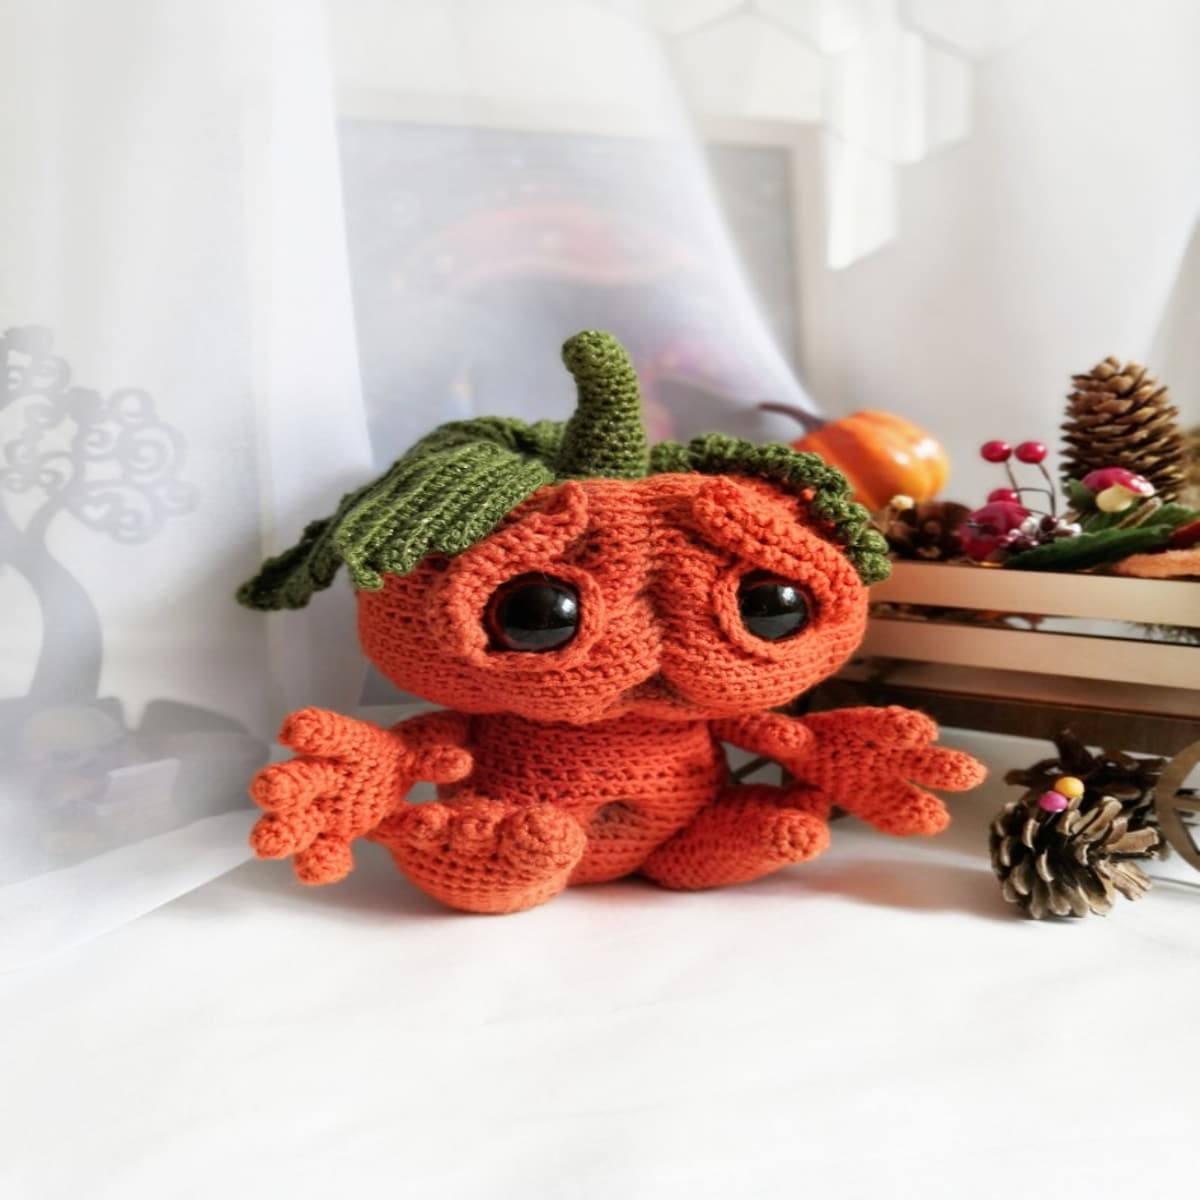 Orange crochet pumpkin monster with large orange hands and feet and a green stem and large leaves on its head.